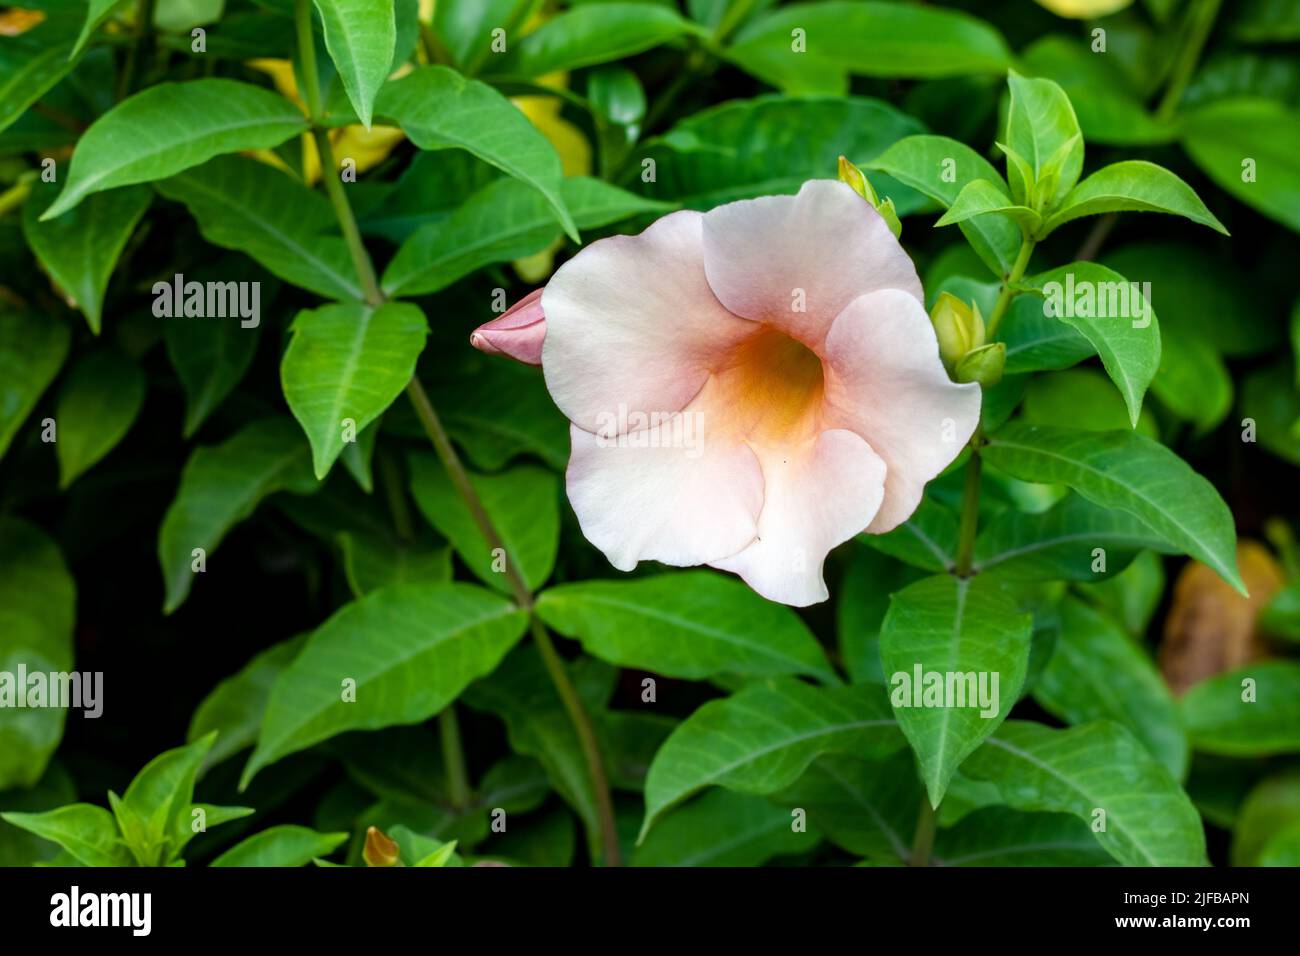 White common trumpet or allamanda cathartica flower close up with copy space Stock Photo